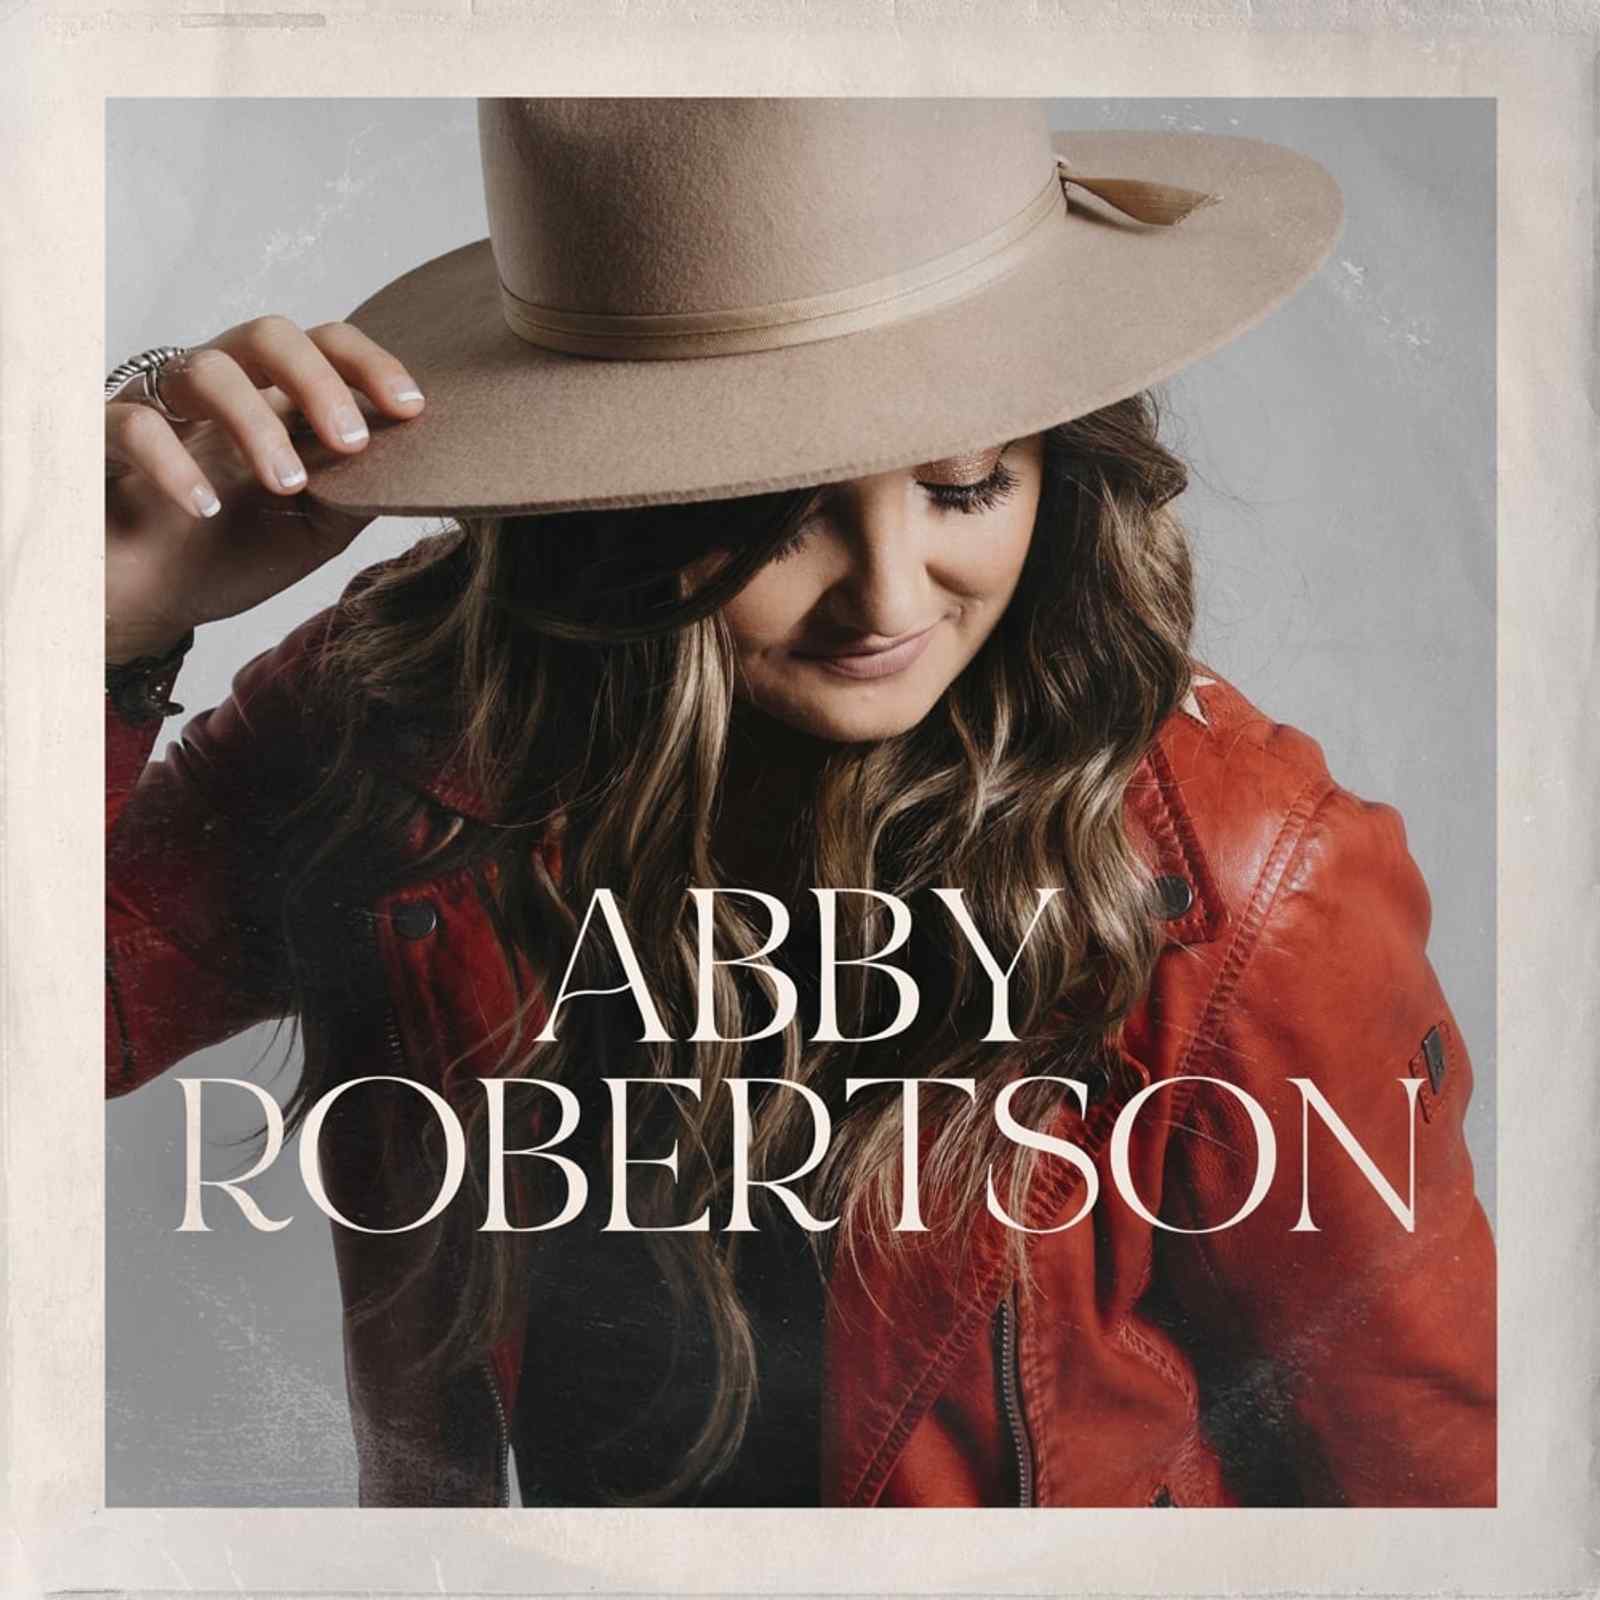 ABBY ROBERTSON RELEASES DEBUT, SELF-TITLED EP